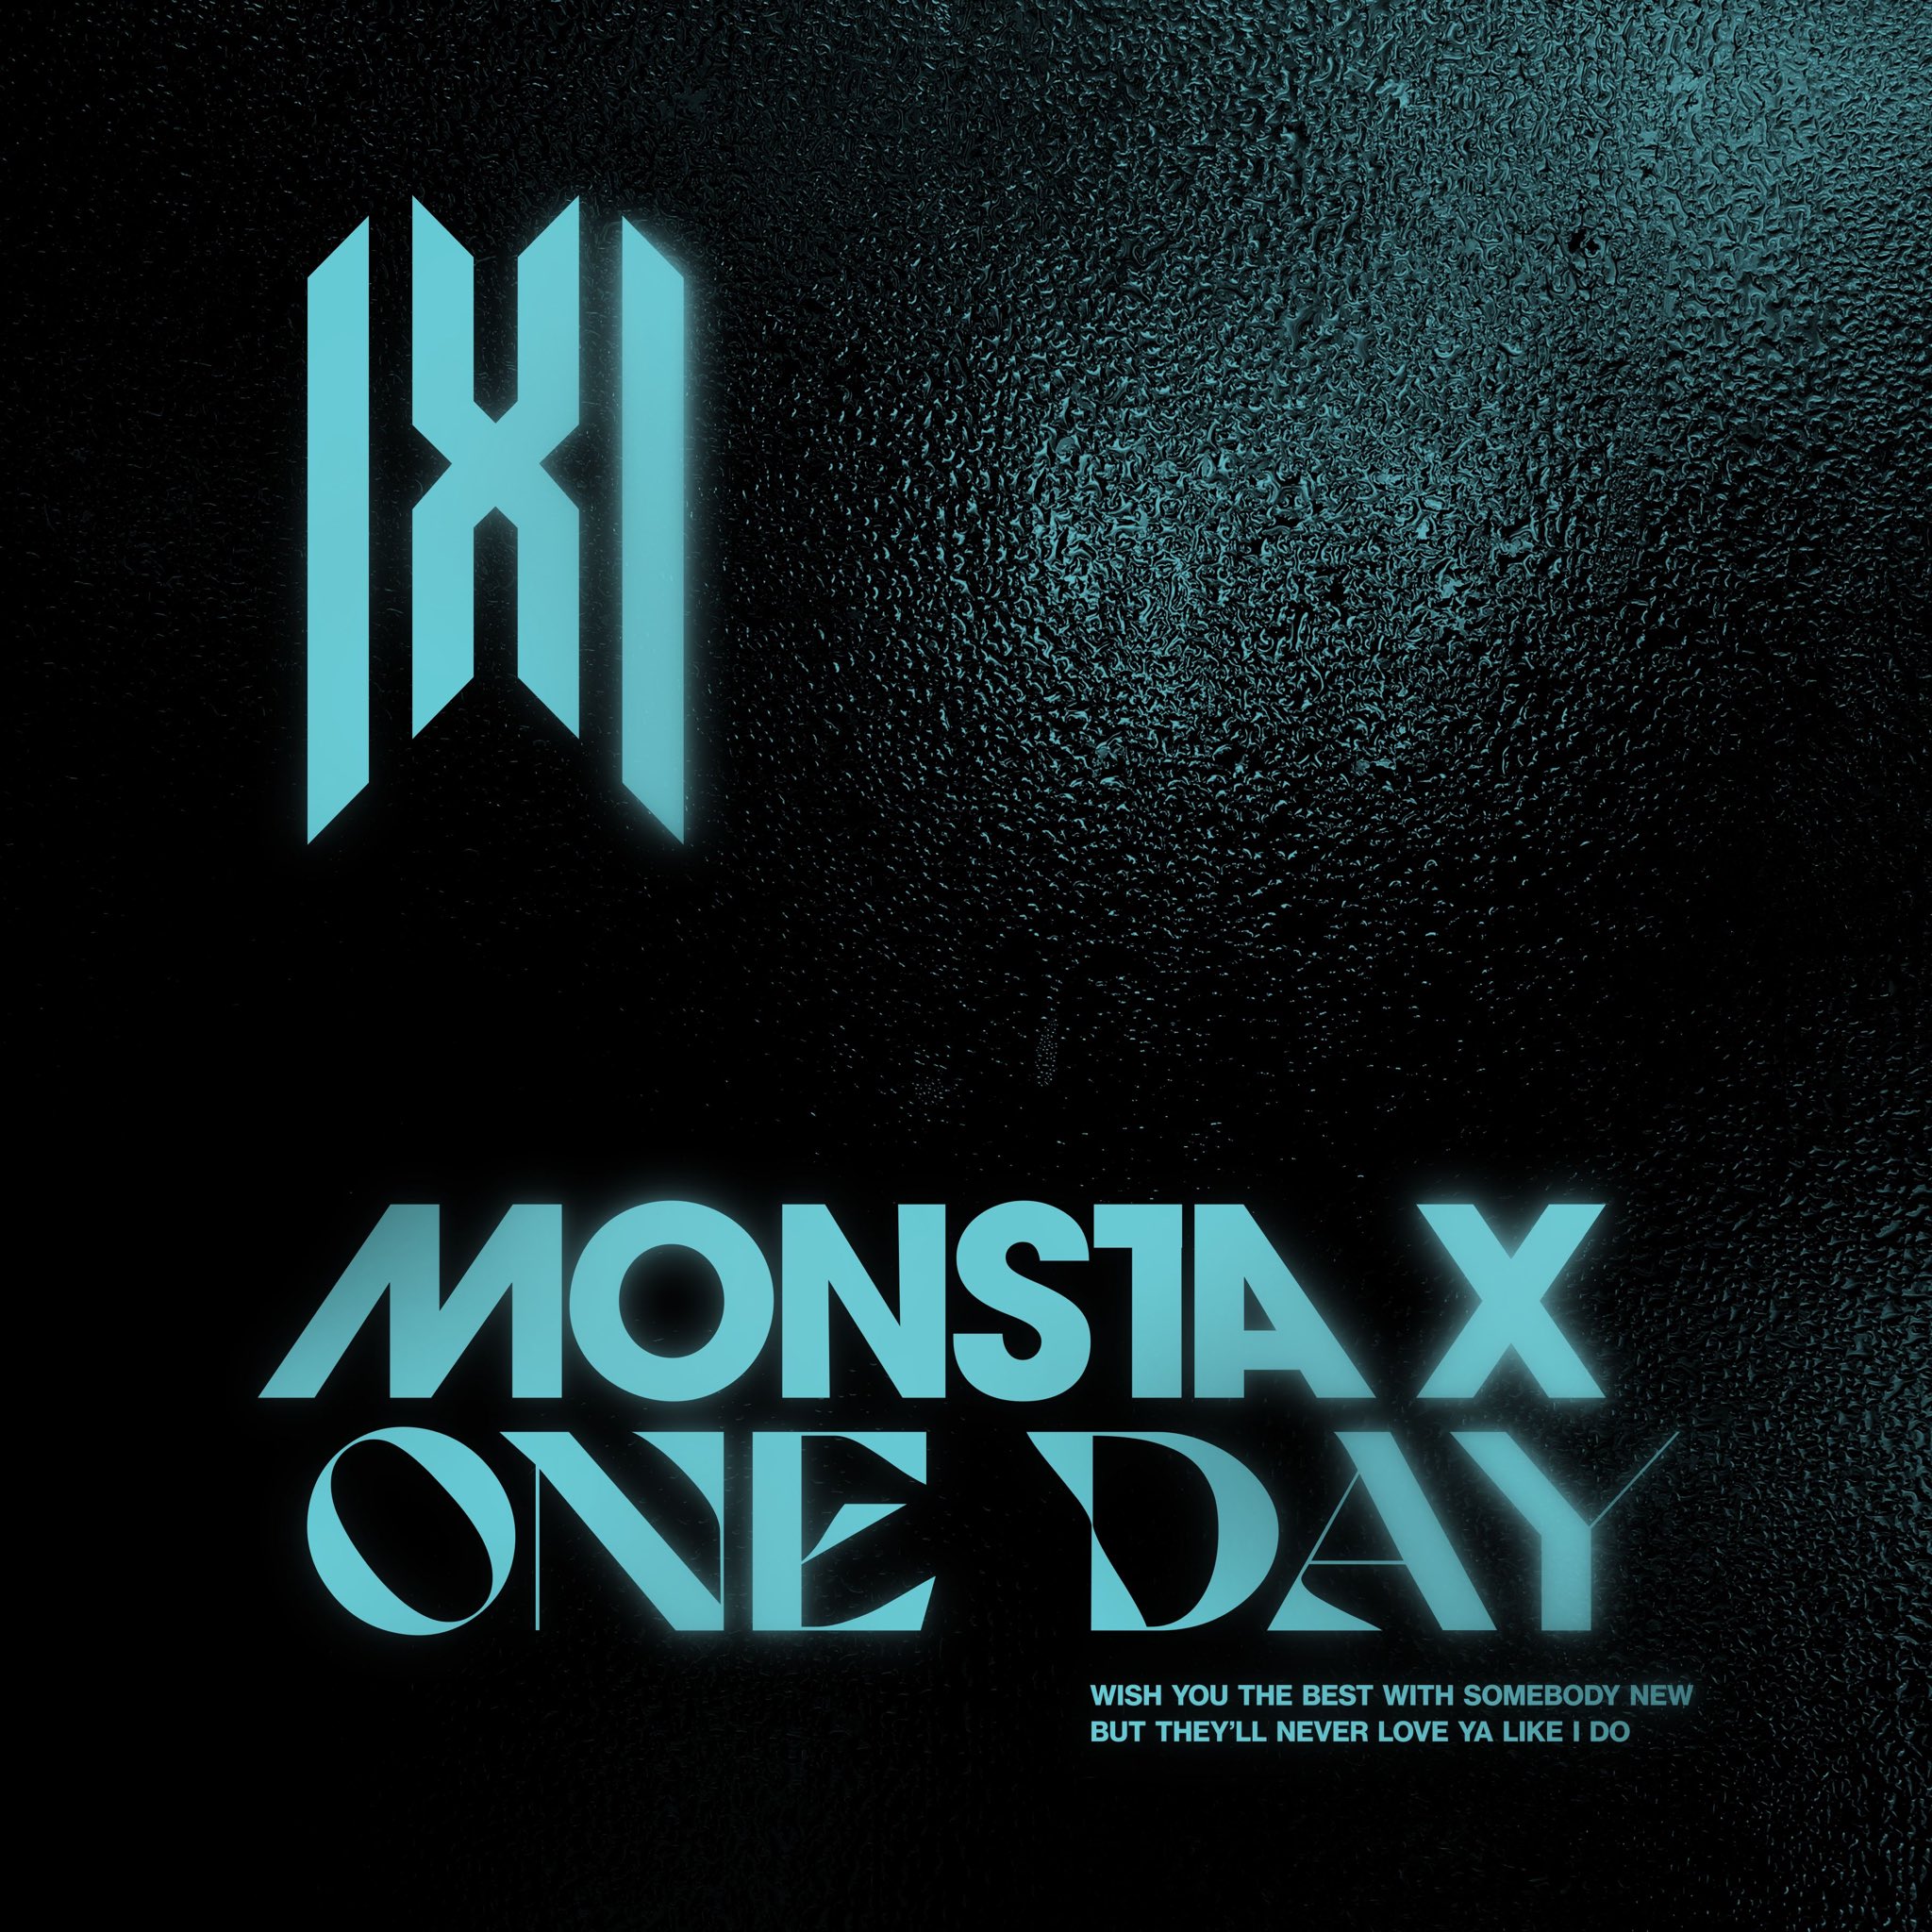 MONSTA X tease new single 'One Day'